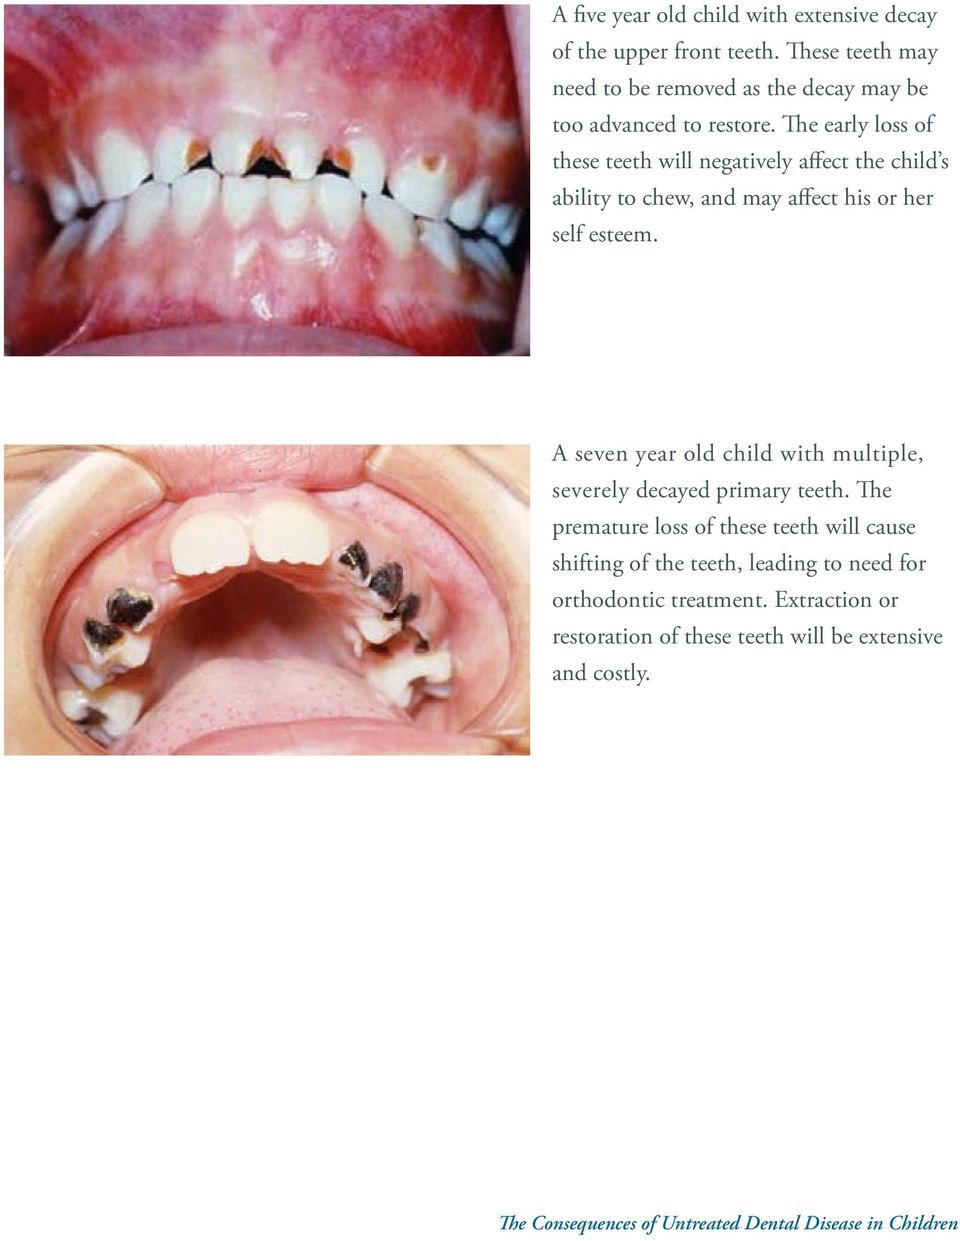 The early loss of these teeth will negatively affect the child s ability to chew, and may affect his or her self esteem.